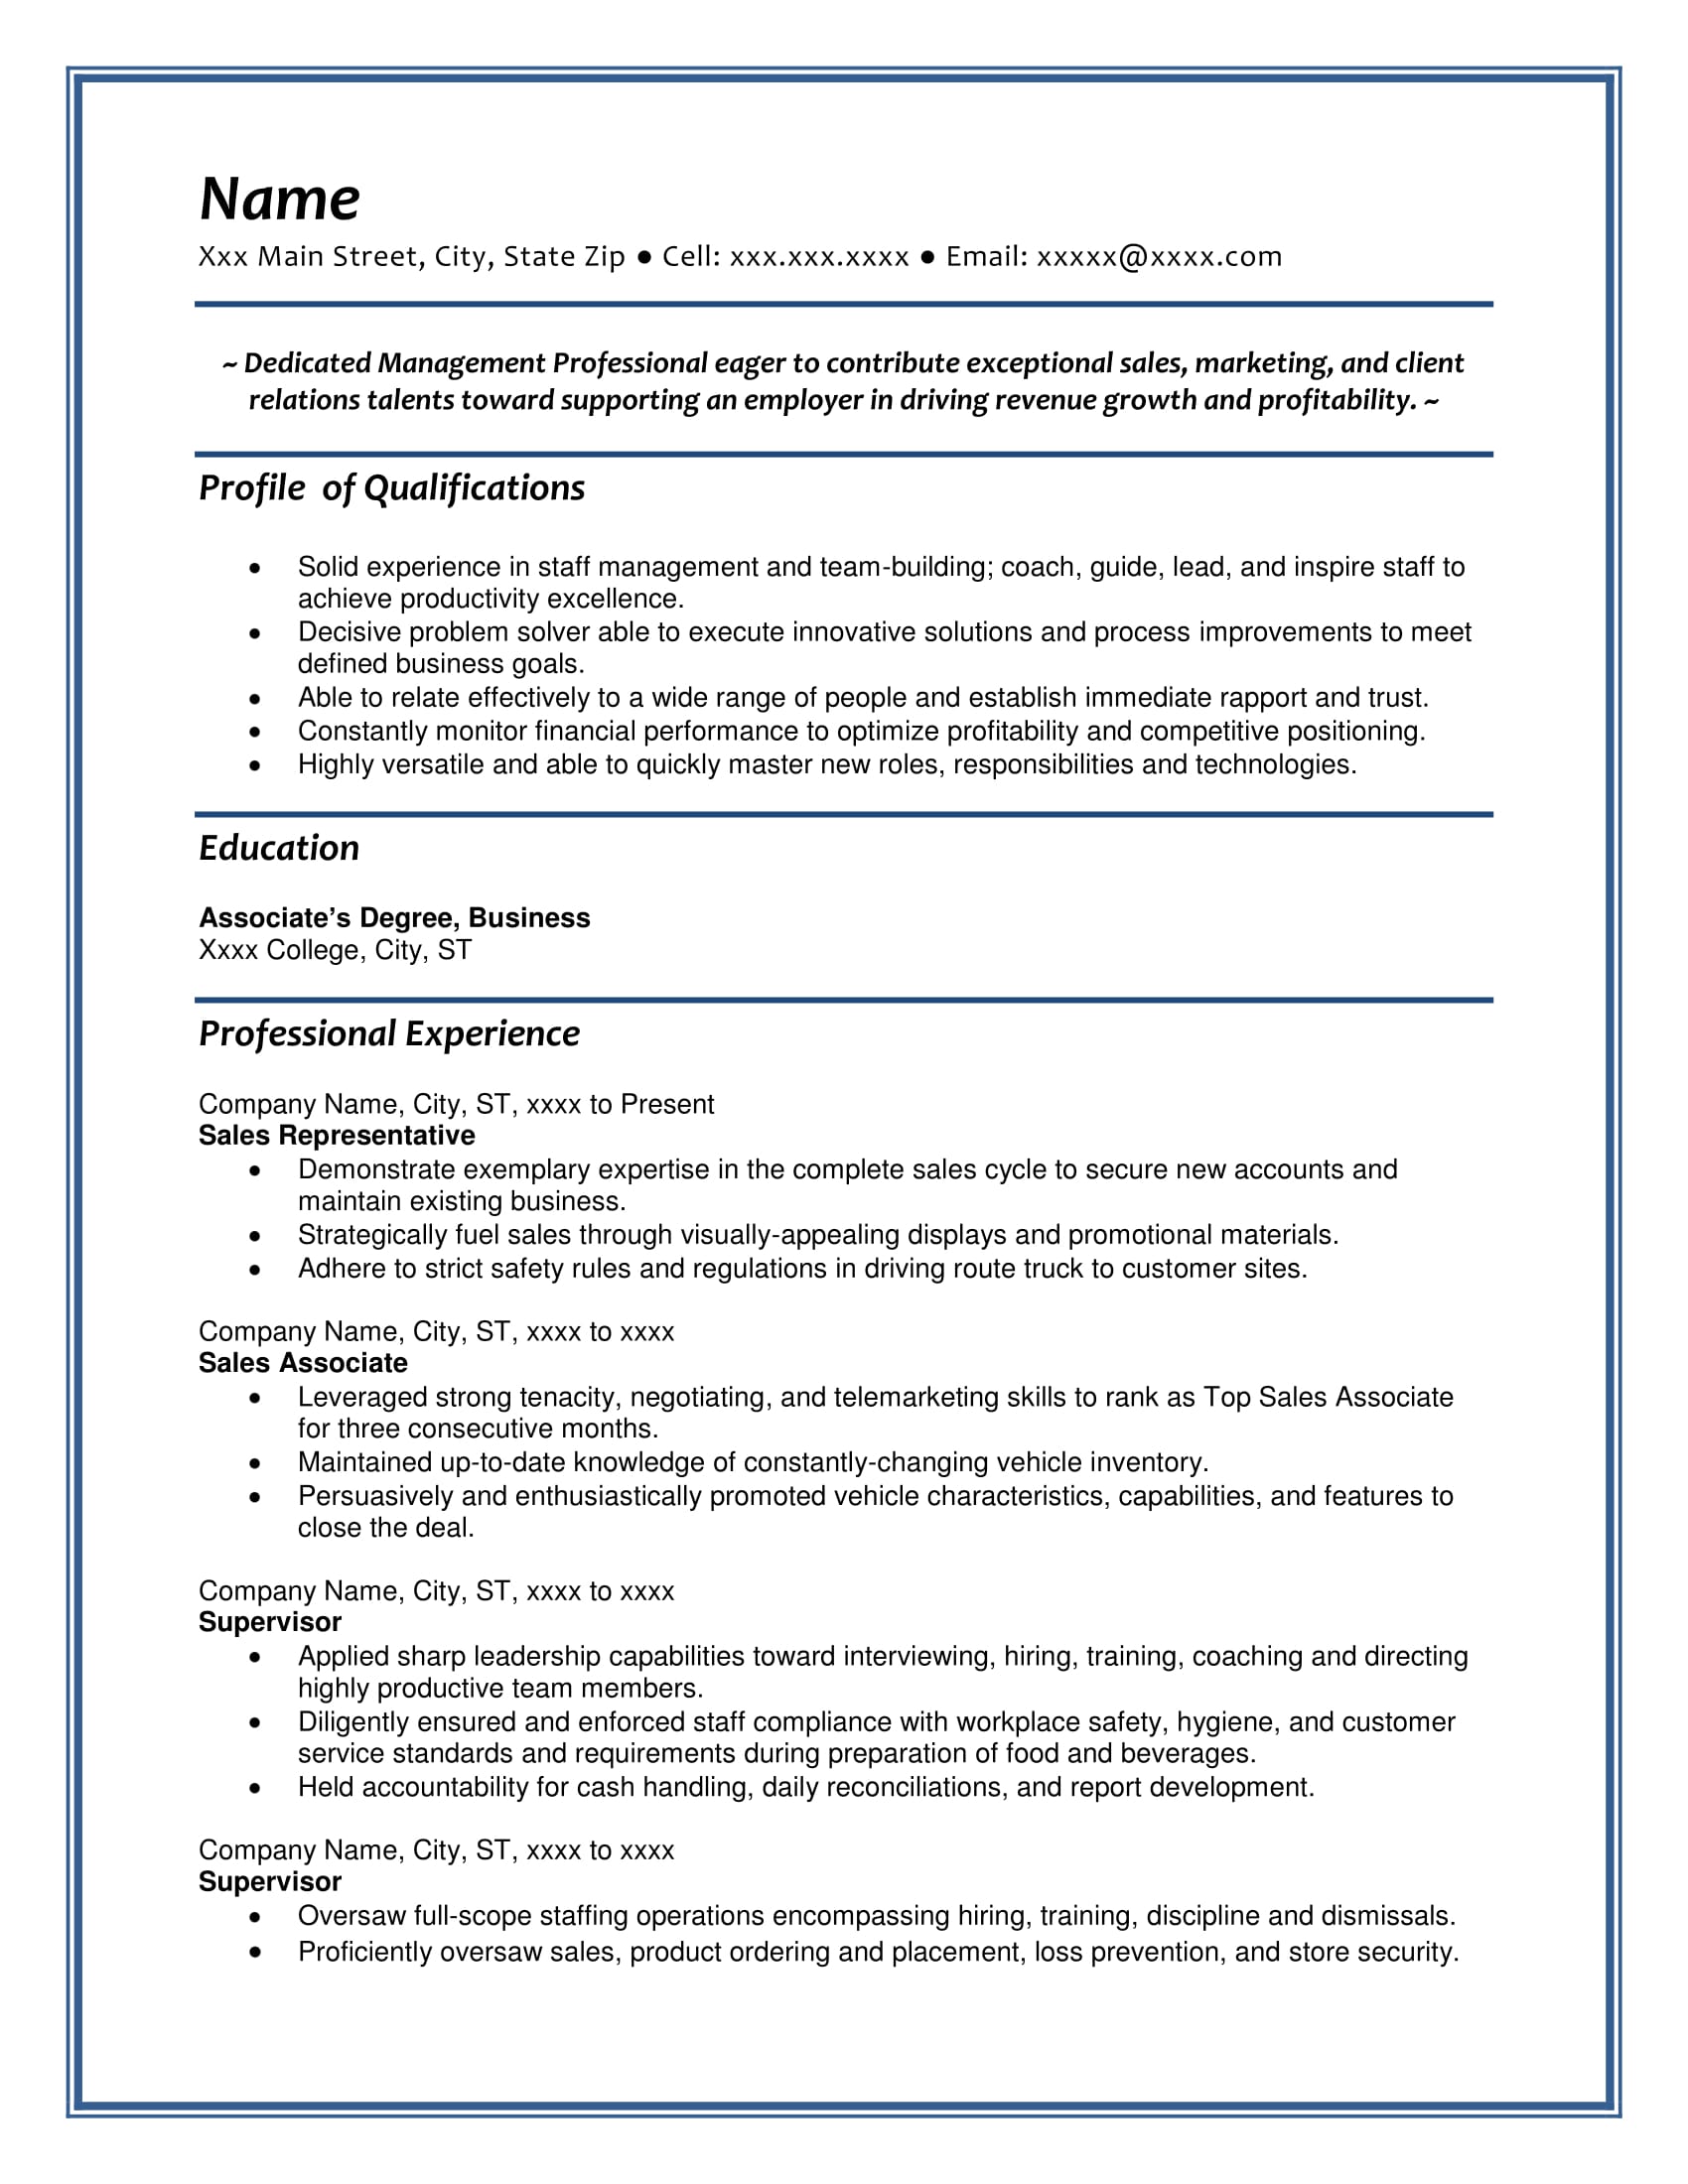 how to write a resume quickly